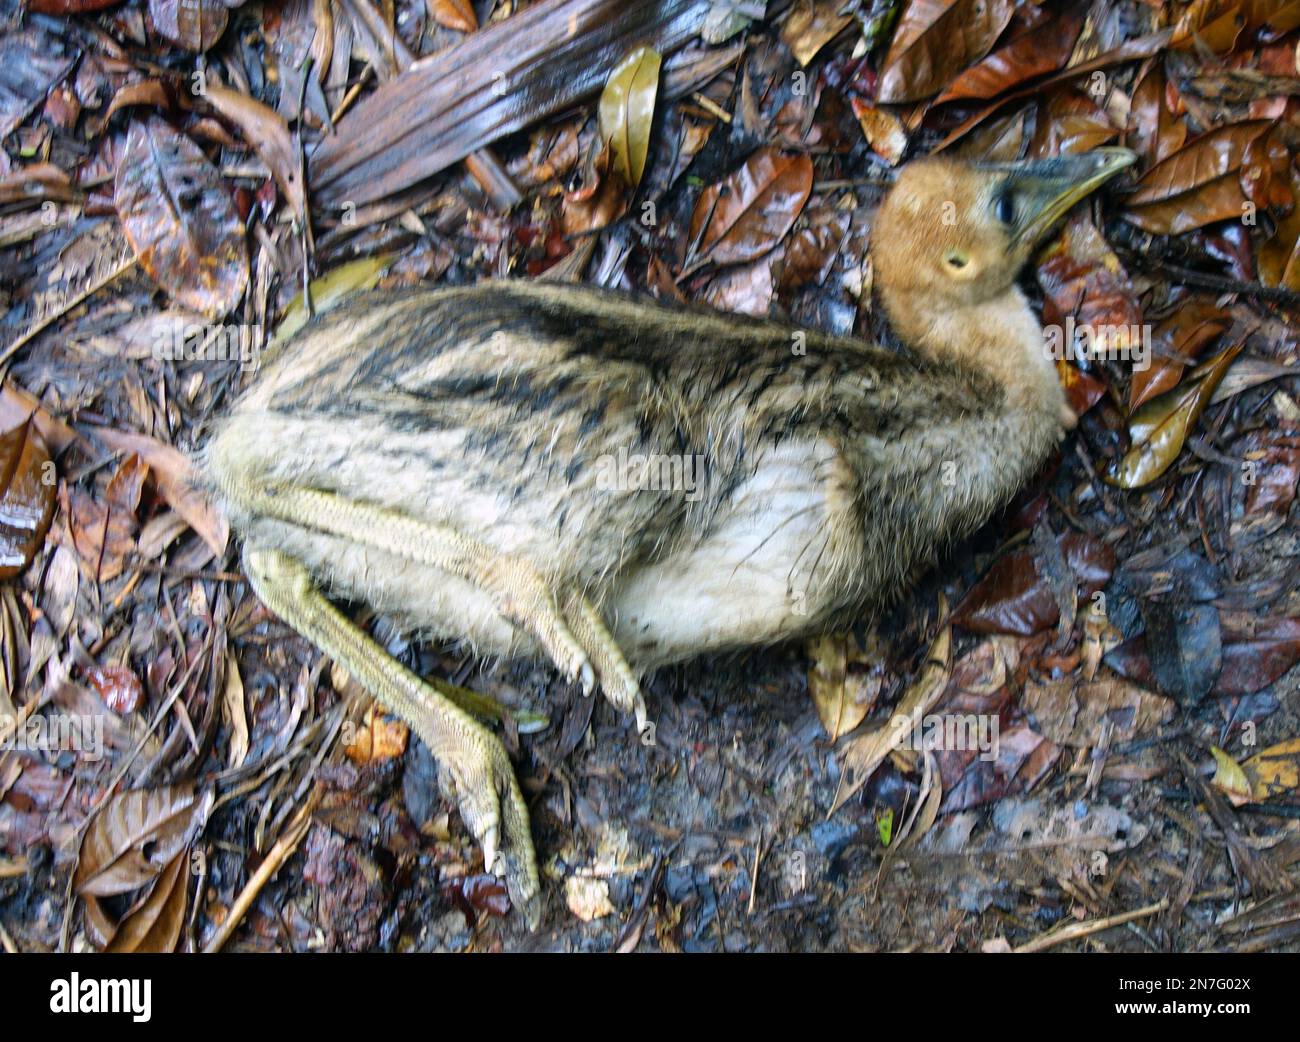 Southern cassowary chick (Casuarius johnsoni) that is very sick and can't stand up from the rainforest floor, Woopen Creek, Queensland, Australia Stock Photo